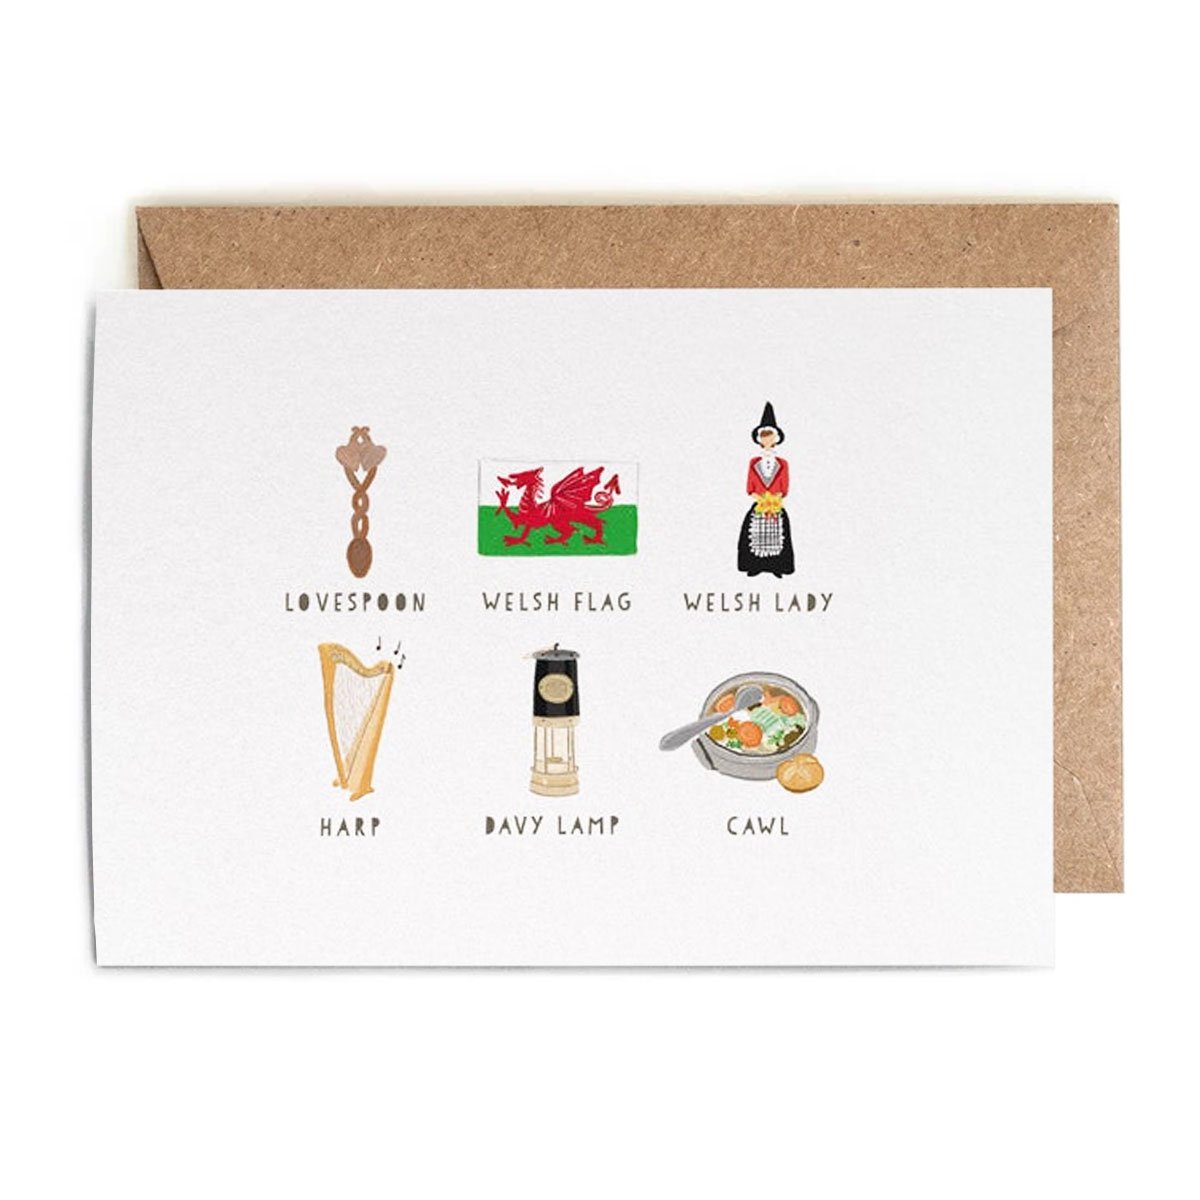 All things Welsh Greeting Card